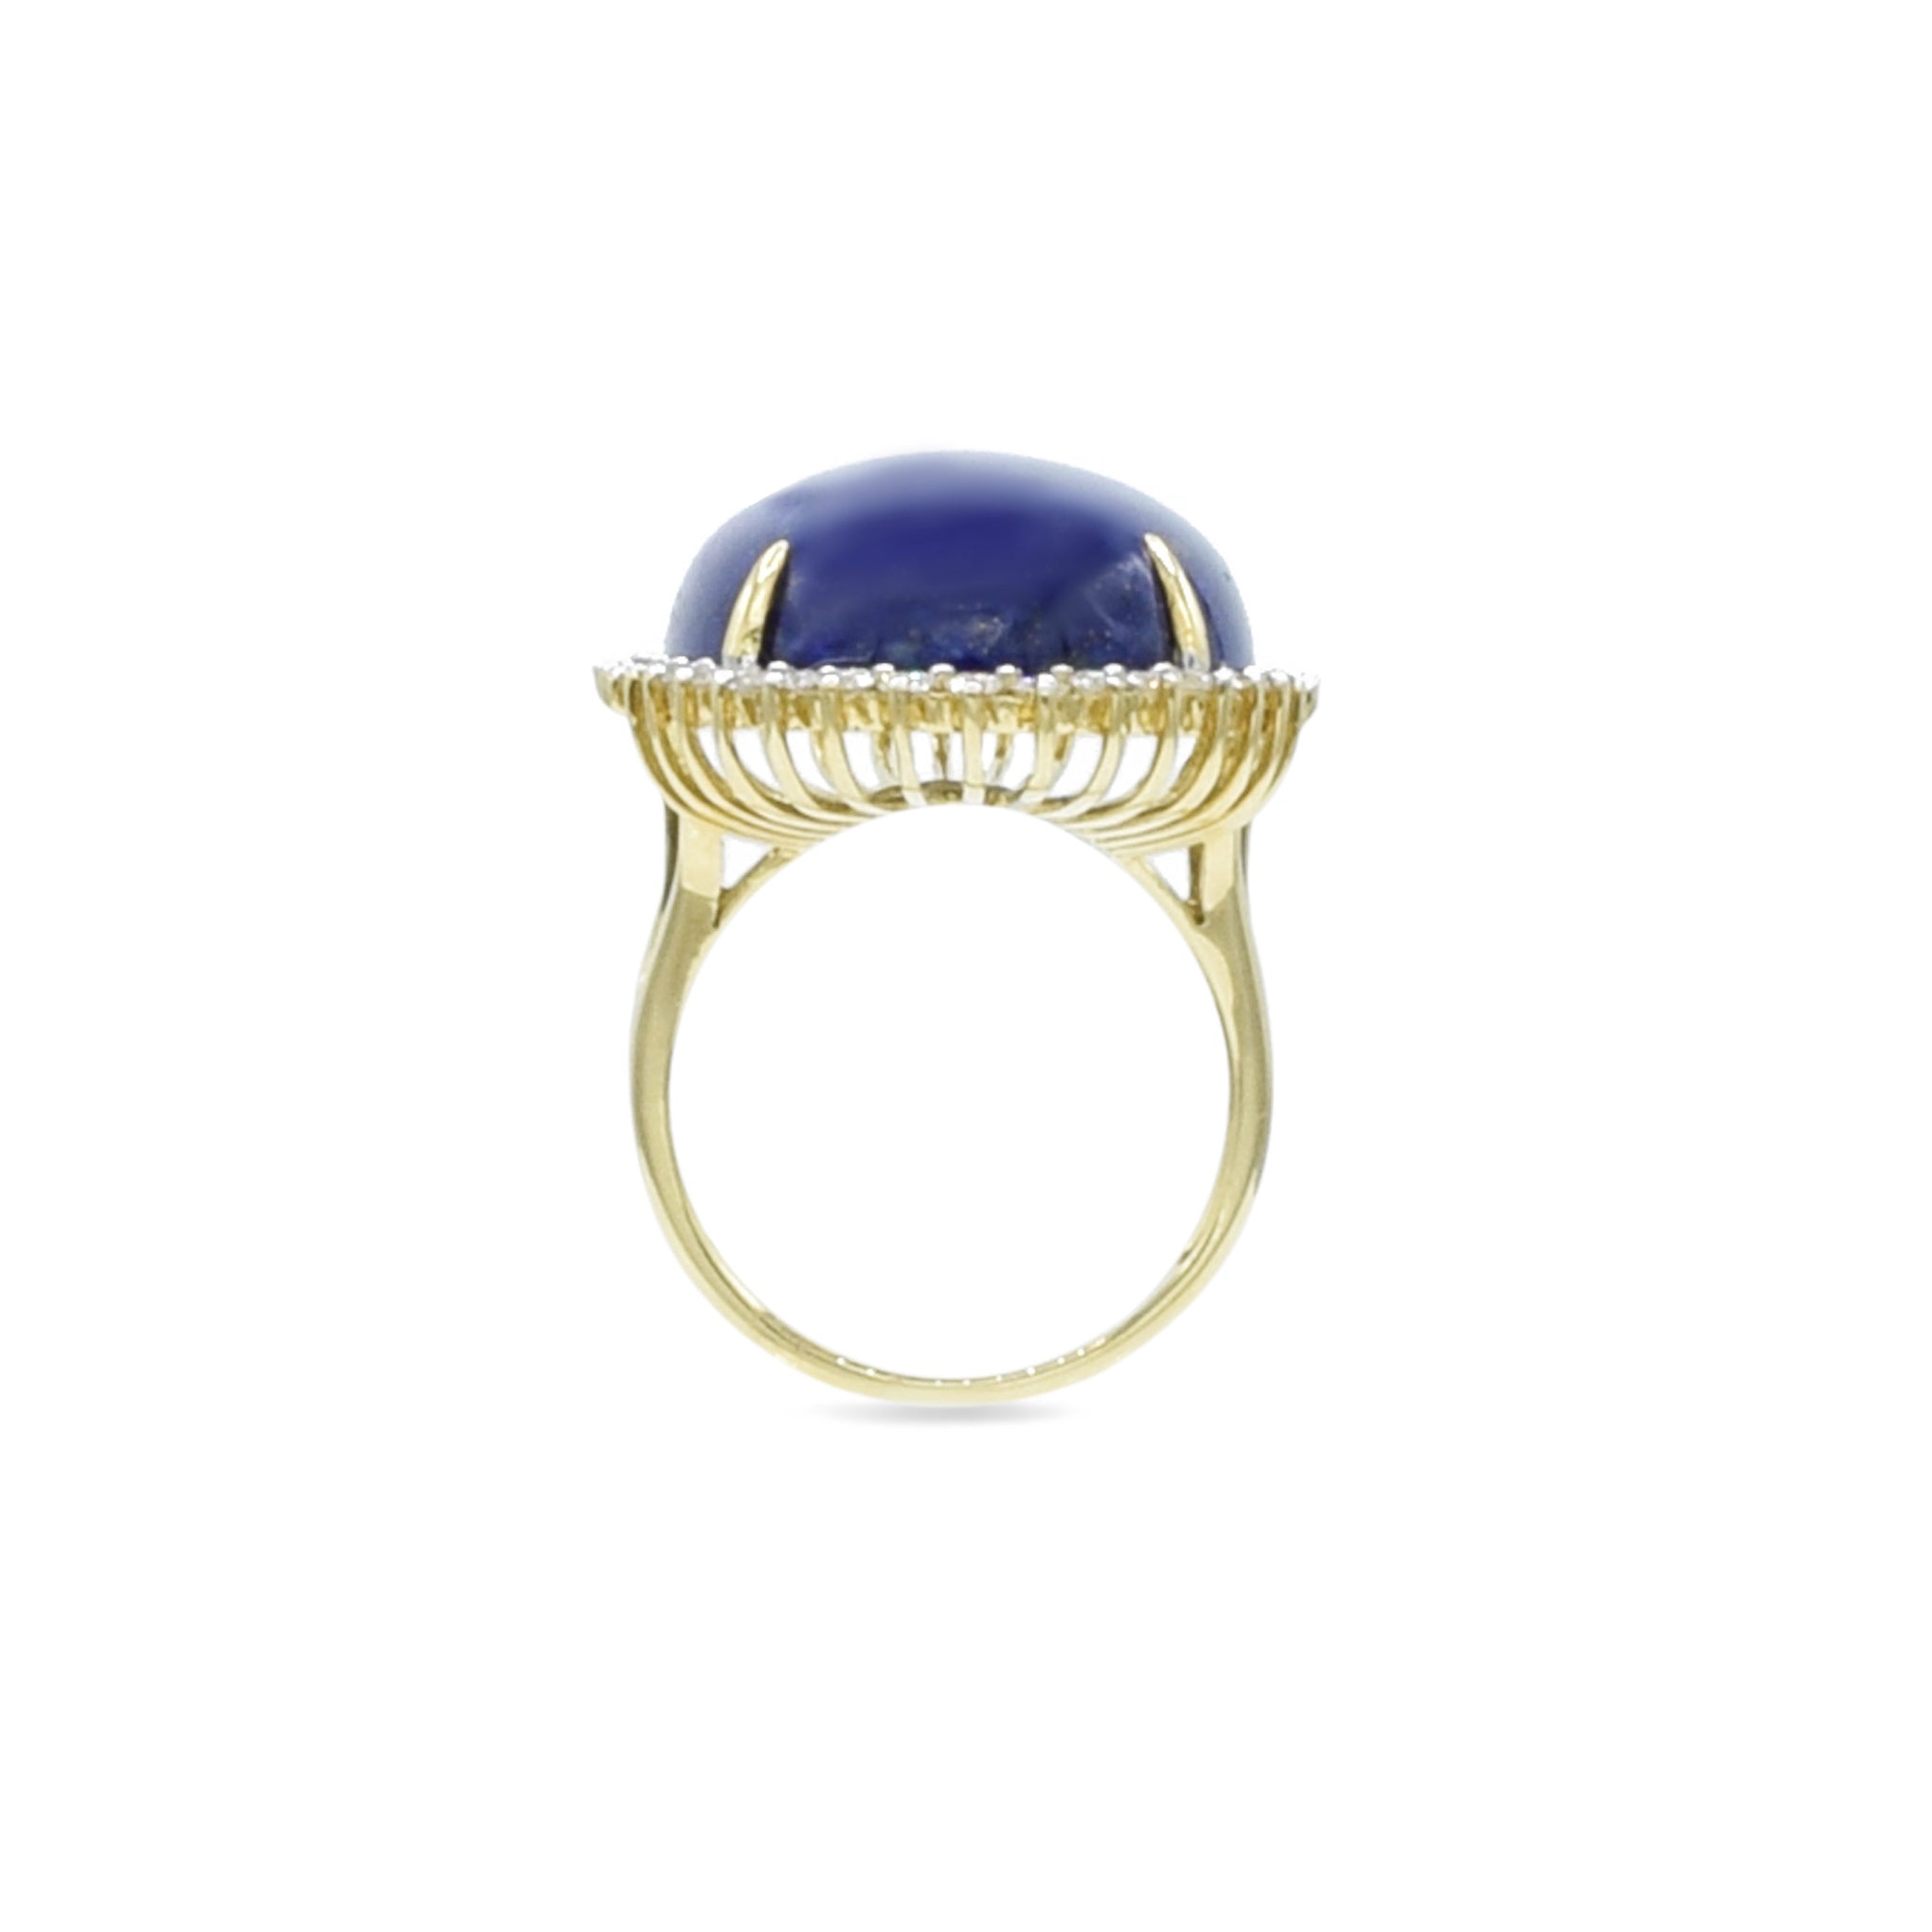 Lapis and Diamond Ring Set in 18kt Yellow Gold